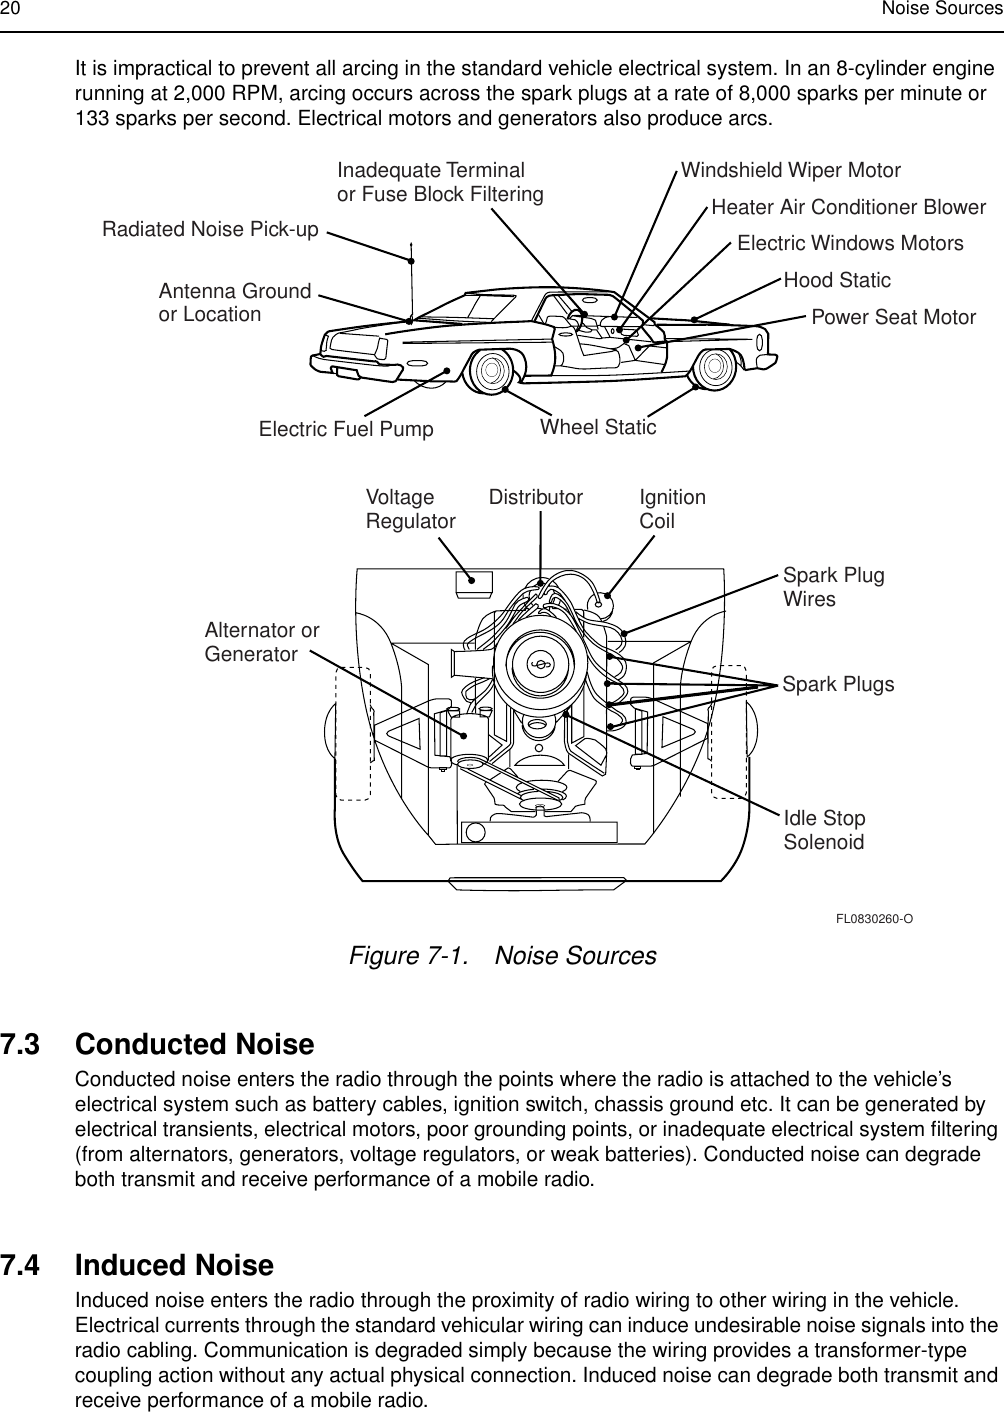 20 Noise SourcesIt is impractical to prevent all arcing in the standard vehicle electrical system. In an 8-cylinder enginerunning at 2,000 RPM, arcing occurs across the spark plugs at a rate of 8,000 sparks per minute or133 sparks per second. Electrical motors and generators also produce arcs.7.3 Conducted NoiseConducted noise enters the radio through the points where the radio is attached to the vehicle’selectrical system such as battery cables, ignition switch, chassis ground etc. It can be generated byelectrical transients, electrical motors, poor grounding points, or inadequate electrical system ﬁltering(from alternators, generators, voltage regulators, or weak batteries). Conducted noise can degradeboth transmit and receive performance of a mobile radio.7.4 Induced NoiseInduced noise enters the radio through the proximity of radio wiring to other wiring in the vehicle.Electrical currents through the standard vehicular wiring can induce undesirable noise signals into theradio cabling. Communication is degraded simply because the wiring provides a transformer-typecoupling action without any actual physical connection. Induced noise can degrade both transmit andreceive performance of a mobile radio.Figure 7-1. Noise SourcesSpark PlugsIdle StopSolenoidFL0830260-OSpark PlugWiresAlternator orGeneratorVoltageRegulator Distributor IgnitionCoilWheel StaticElectric Fuel PumpAntenna Groundor LocationRadiated Noise Pick-upInadequate Terminalor Fuse Block Filtering Windshield Wiper MotorHeater Air Conditioner BlowerElectric Windows MotorsHood StaticPower Seat Motor